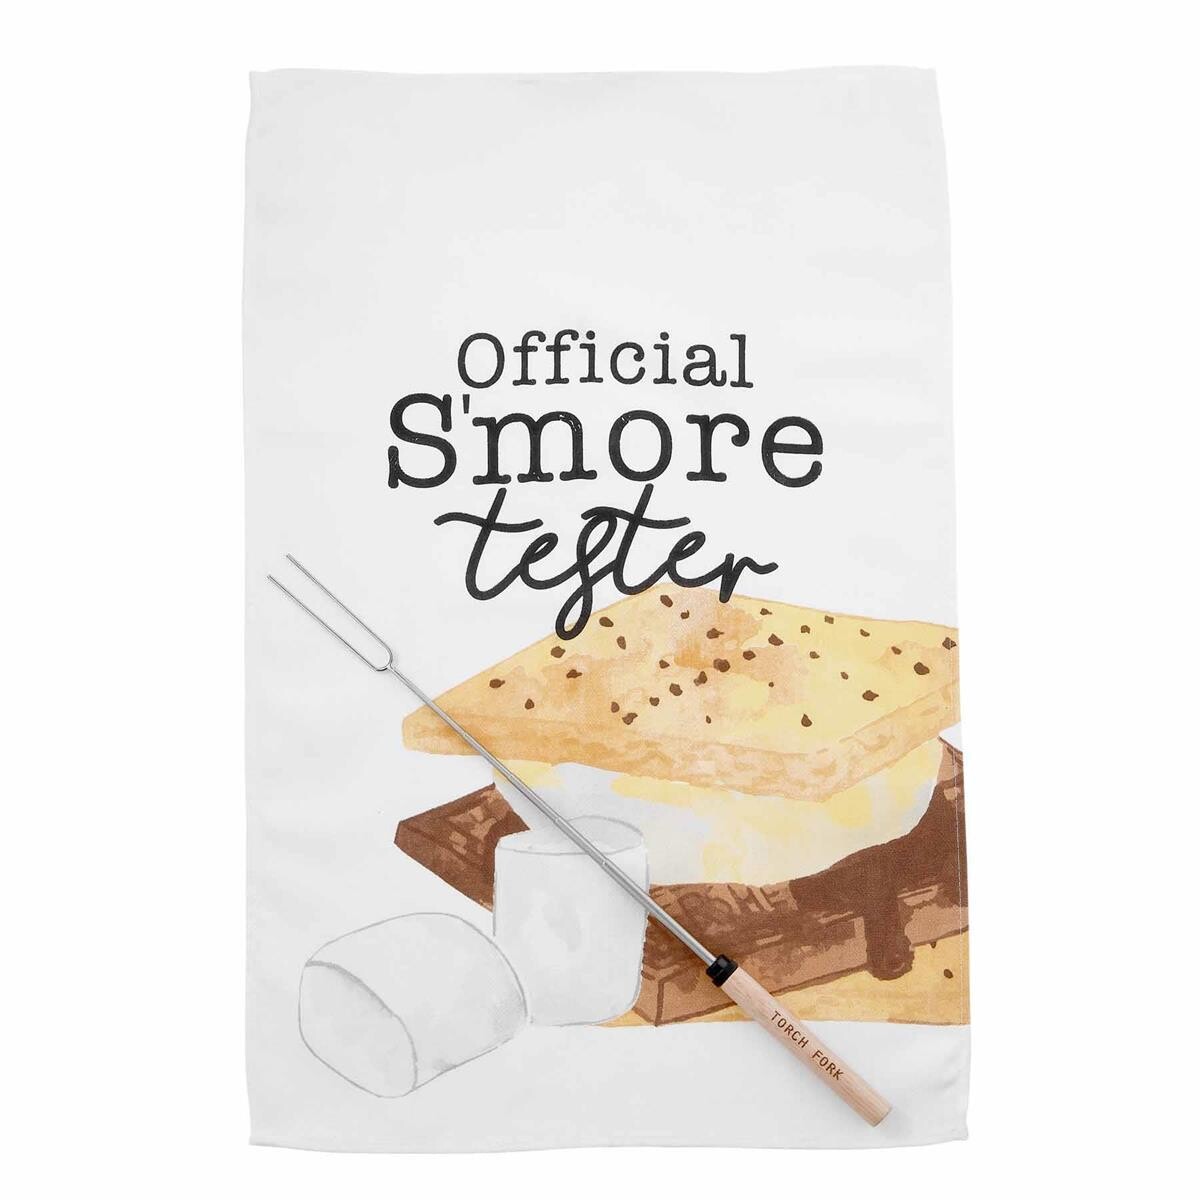 S’more Tester Towel and Stick